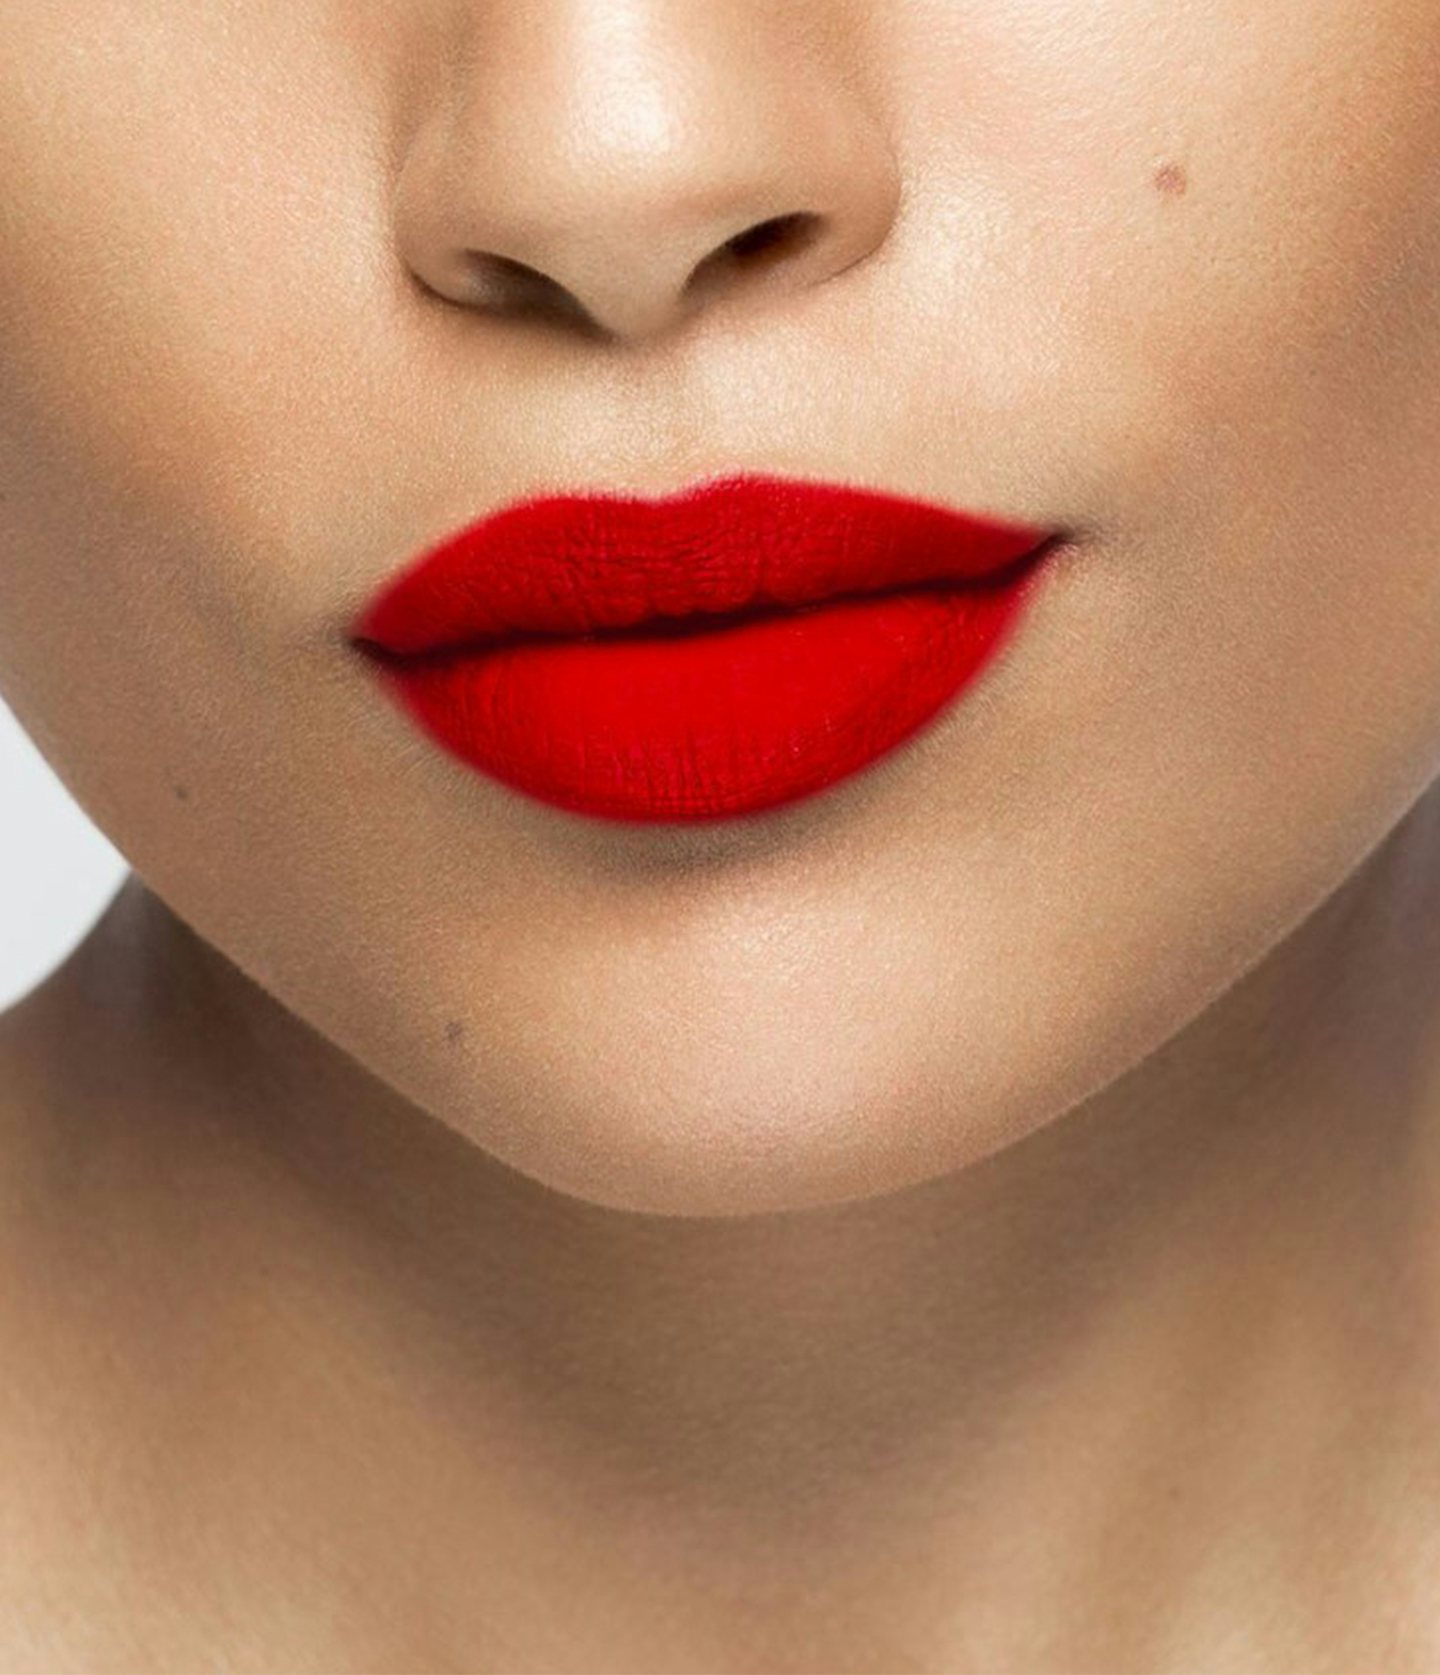 La bouche rouge Rouge Vendôme lipstick shade on the lips of an Asian model